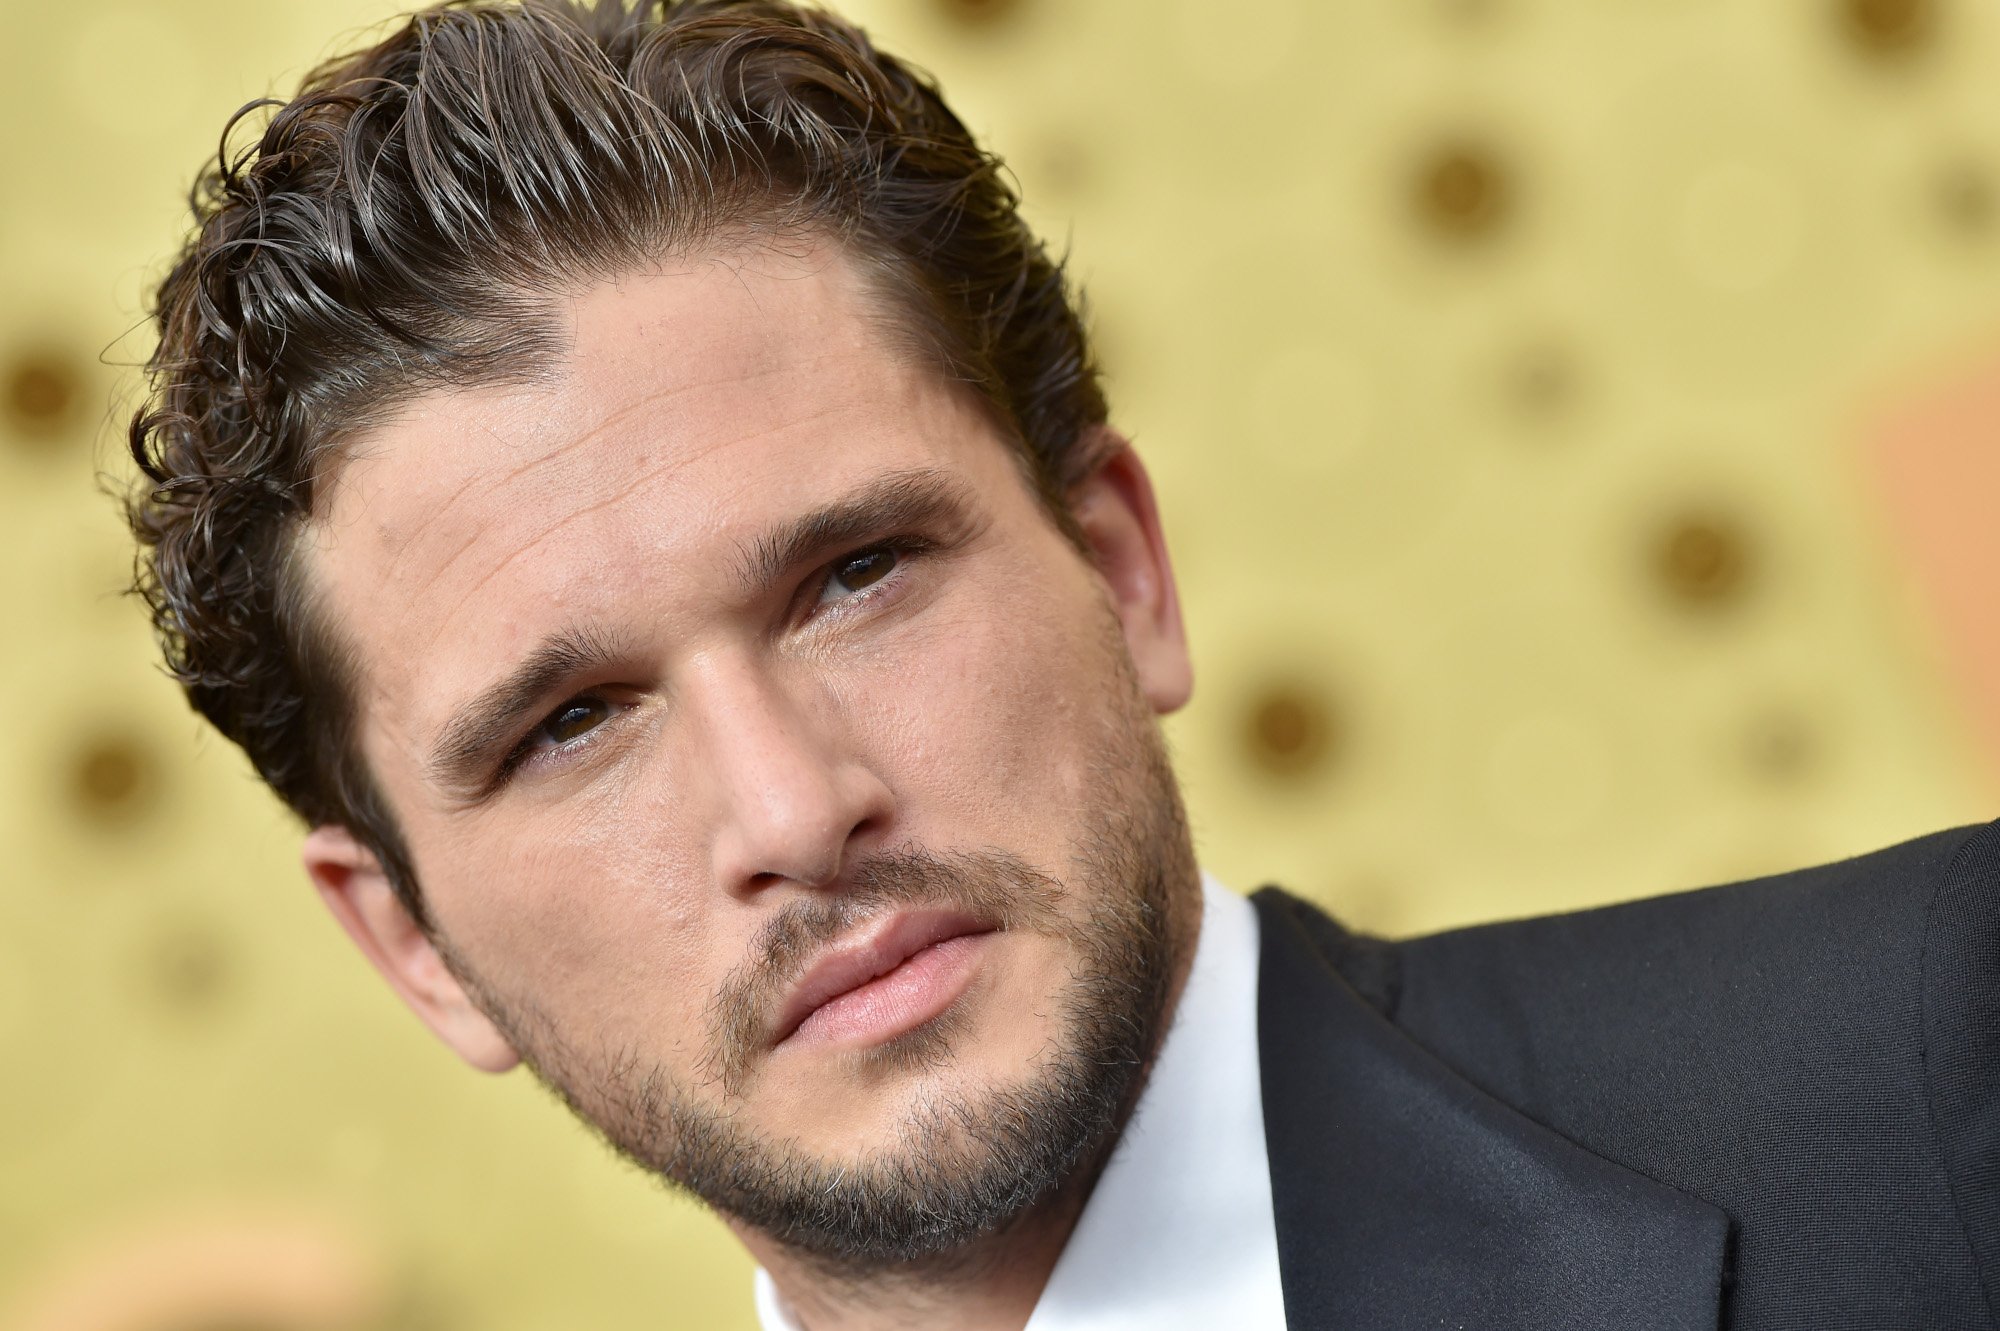 Game of Thrones star Kit Harington wearing a suit and standing in front of a golden wall